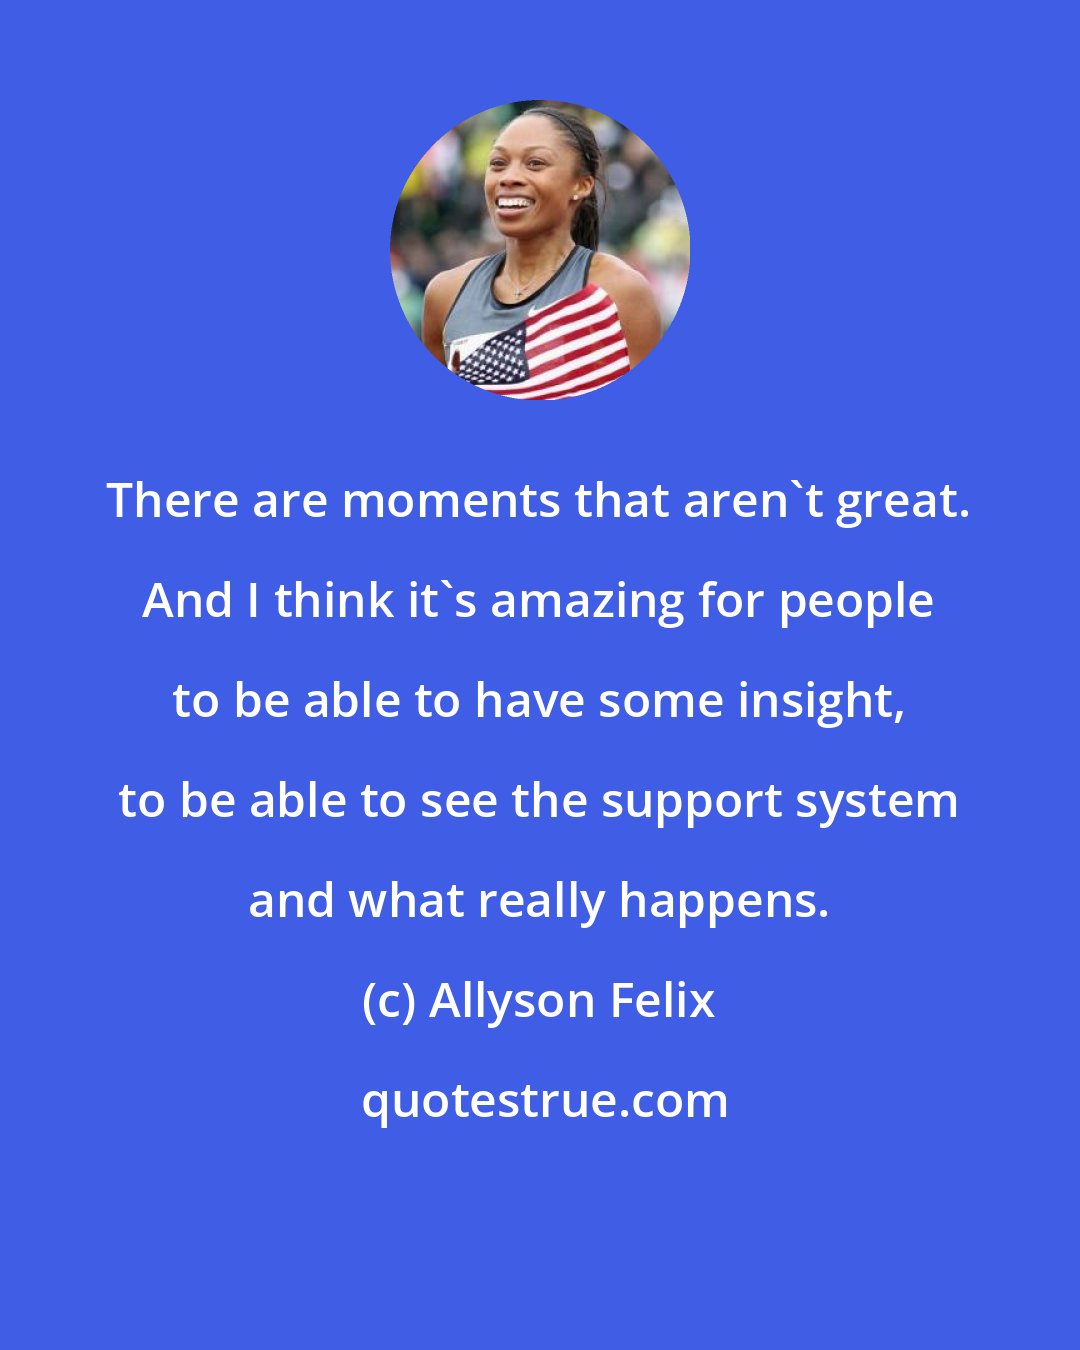 Allyson Felix: There are moments that aren't great. And I think it's amazing for people to be able to have some insight, to be able to see the support system and what really happens.